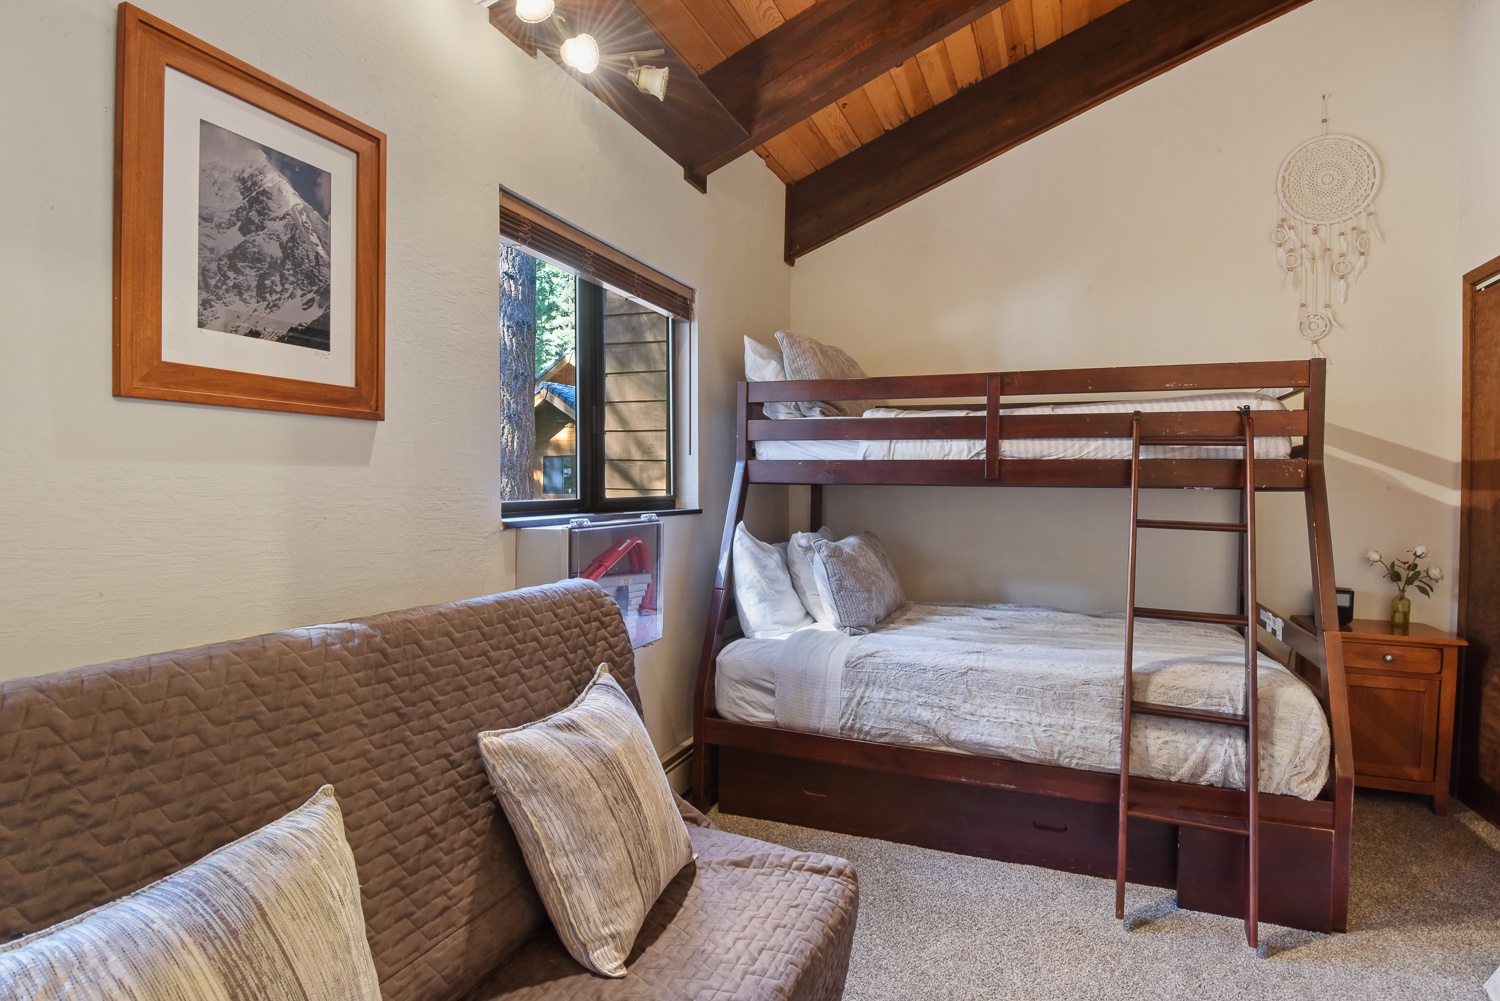 Unit #2: The 3rd level back bedroom offers a twin-over-full bunkbed & a full-sized futon